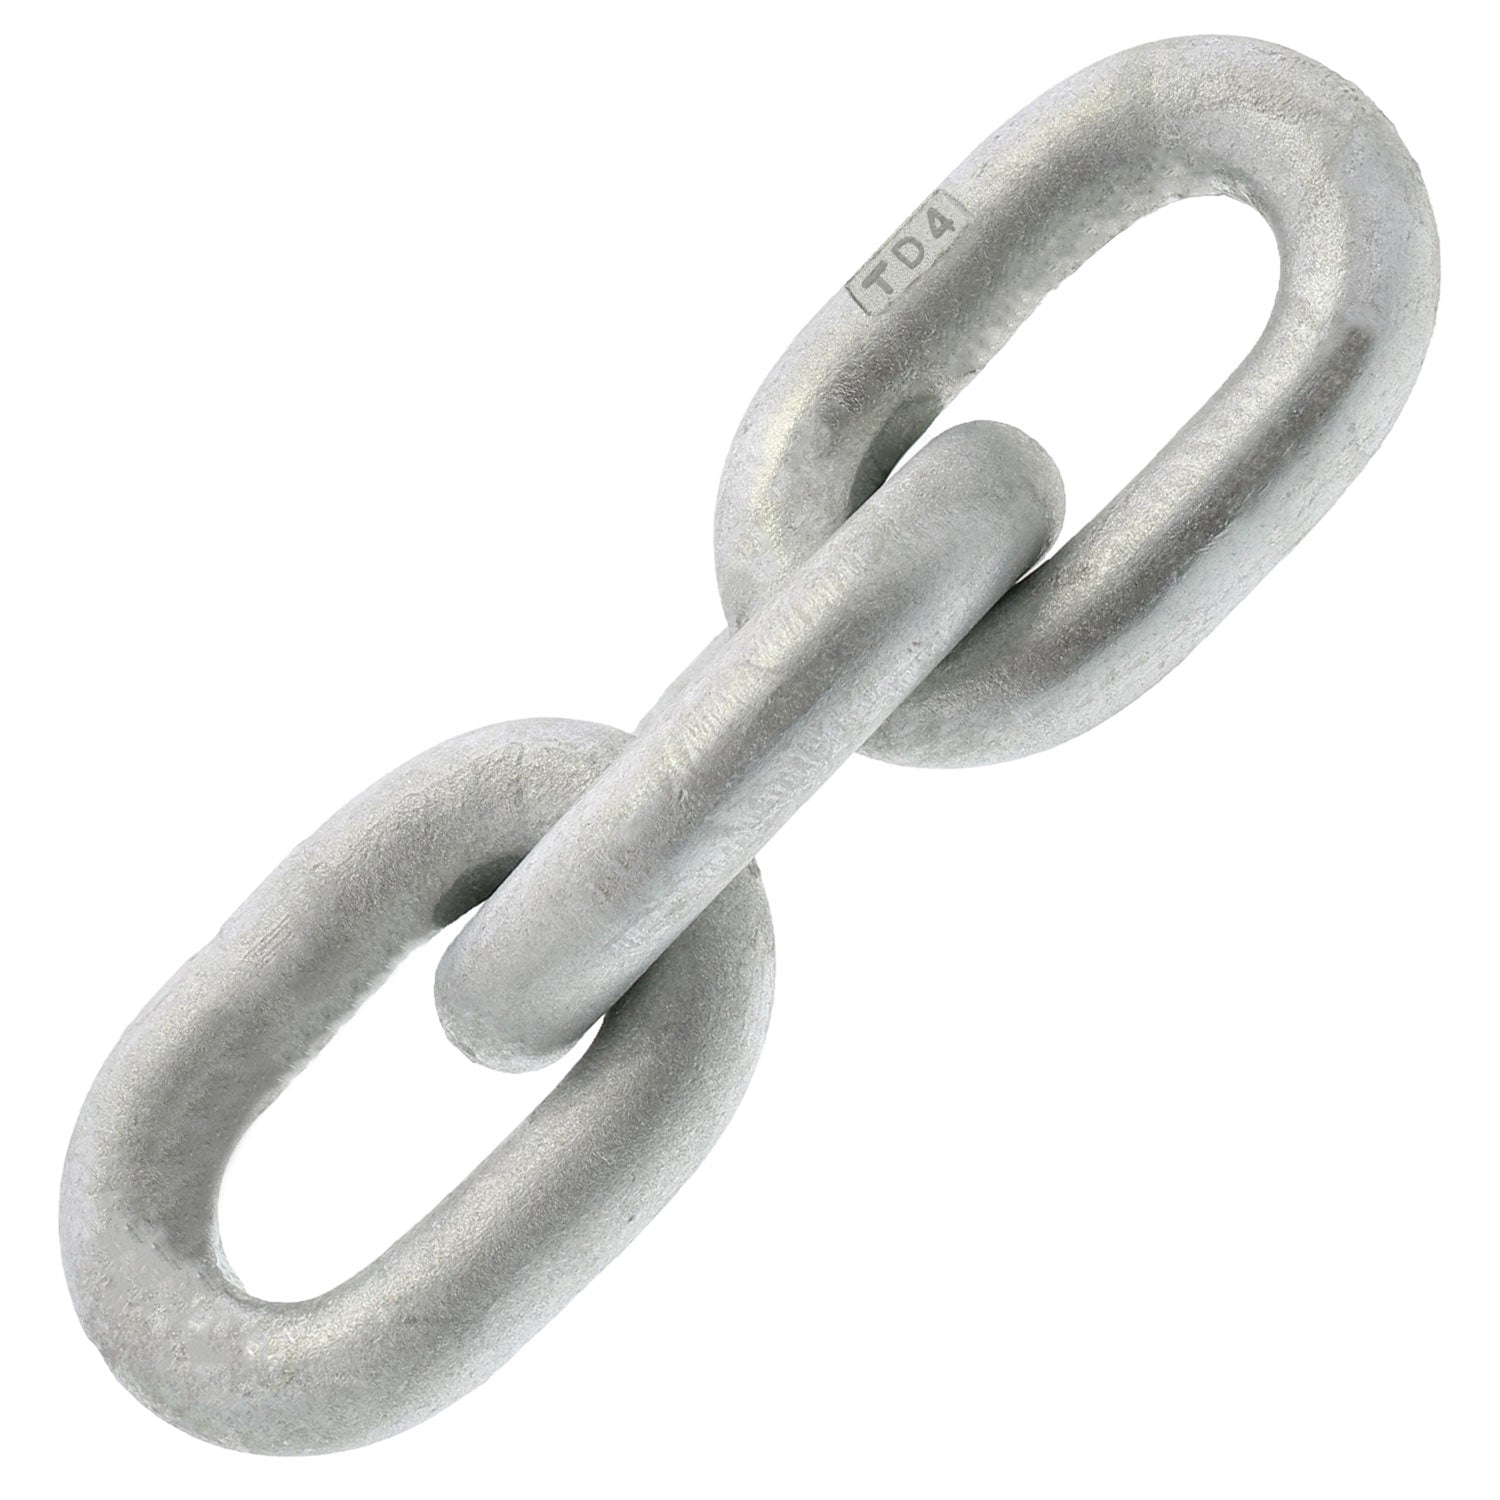 8mm Trident Marine DIN766, Hot Dipped Galvanized Chain (Sold Per Foot)